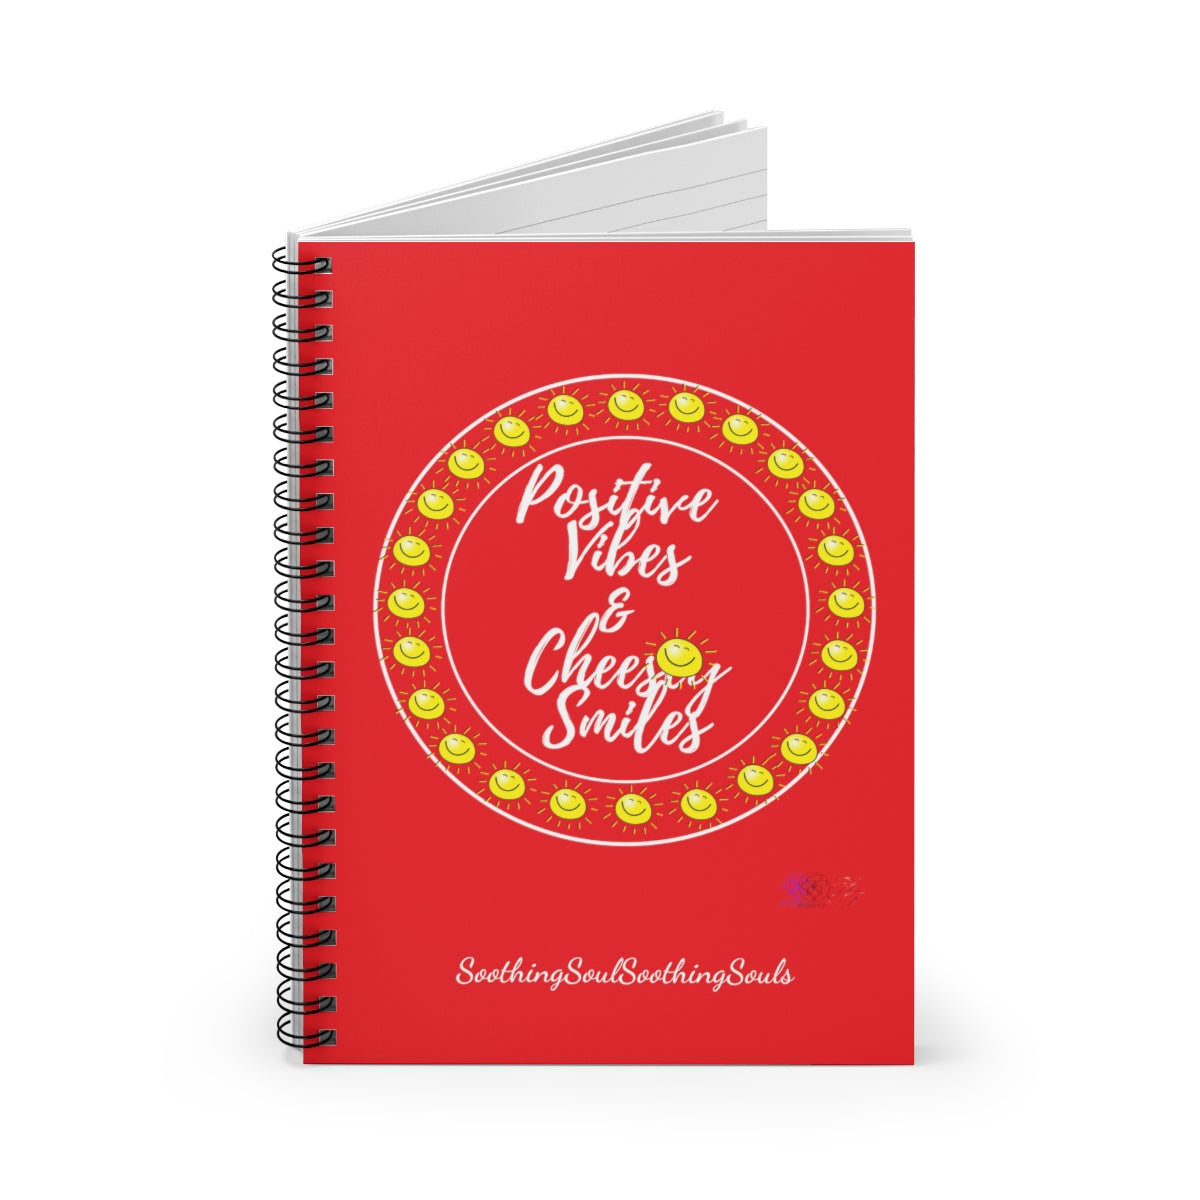 SSSS Positive Vibes & Cheesey Smiles Notebook Red (WL)